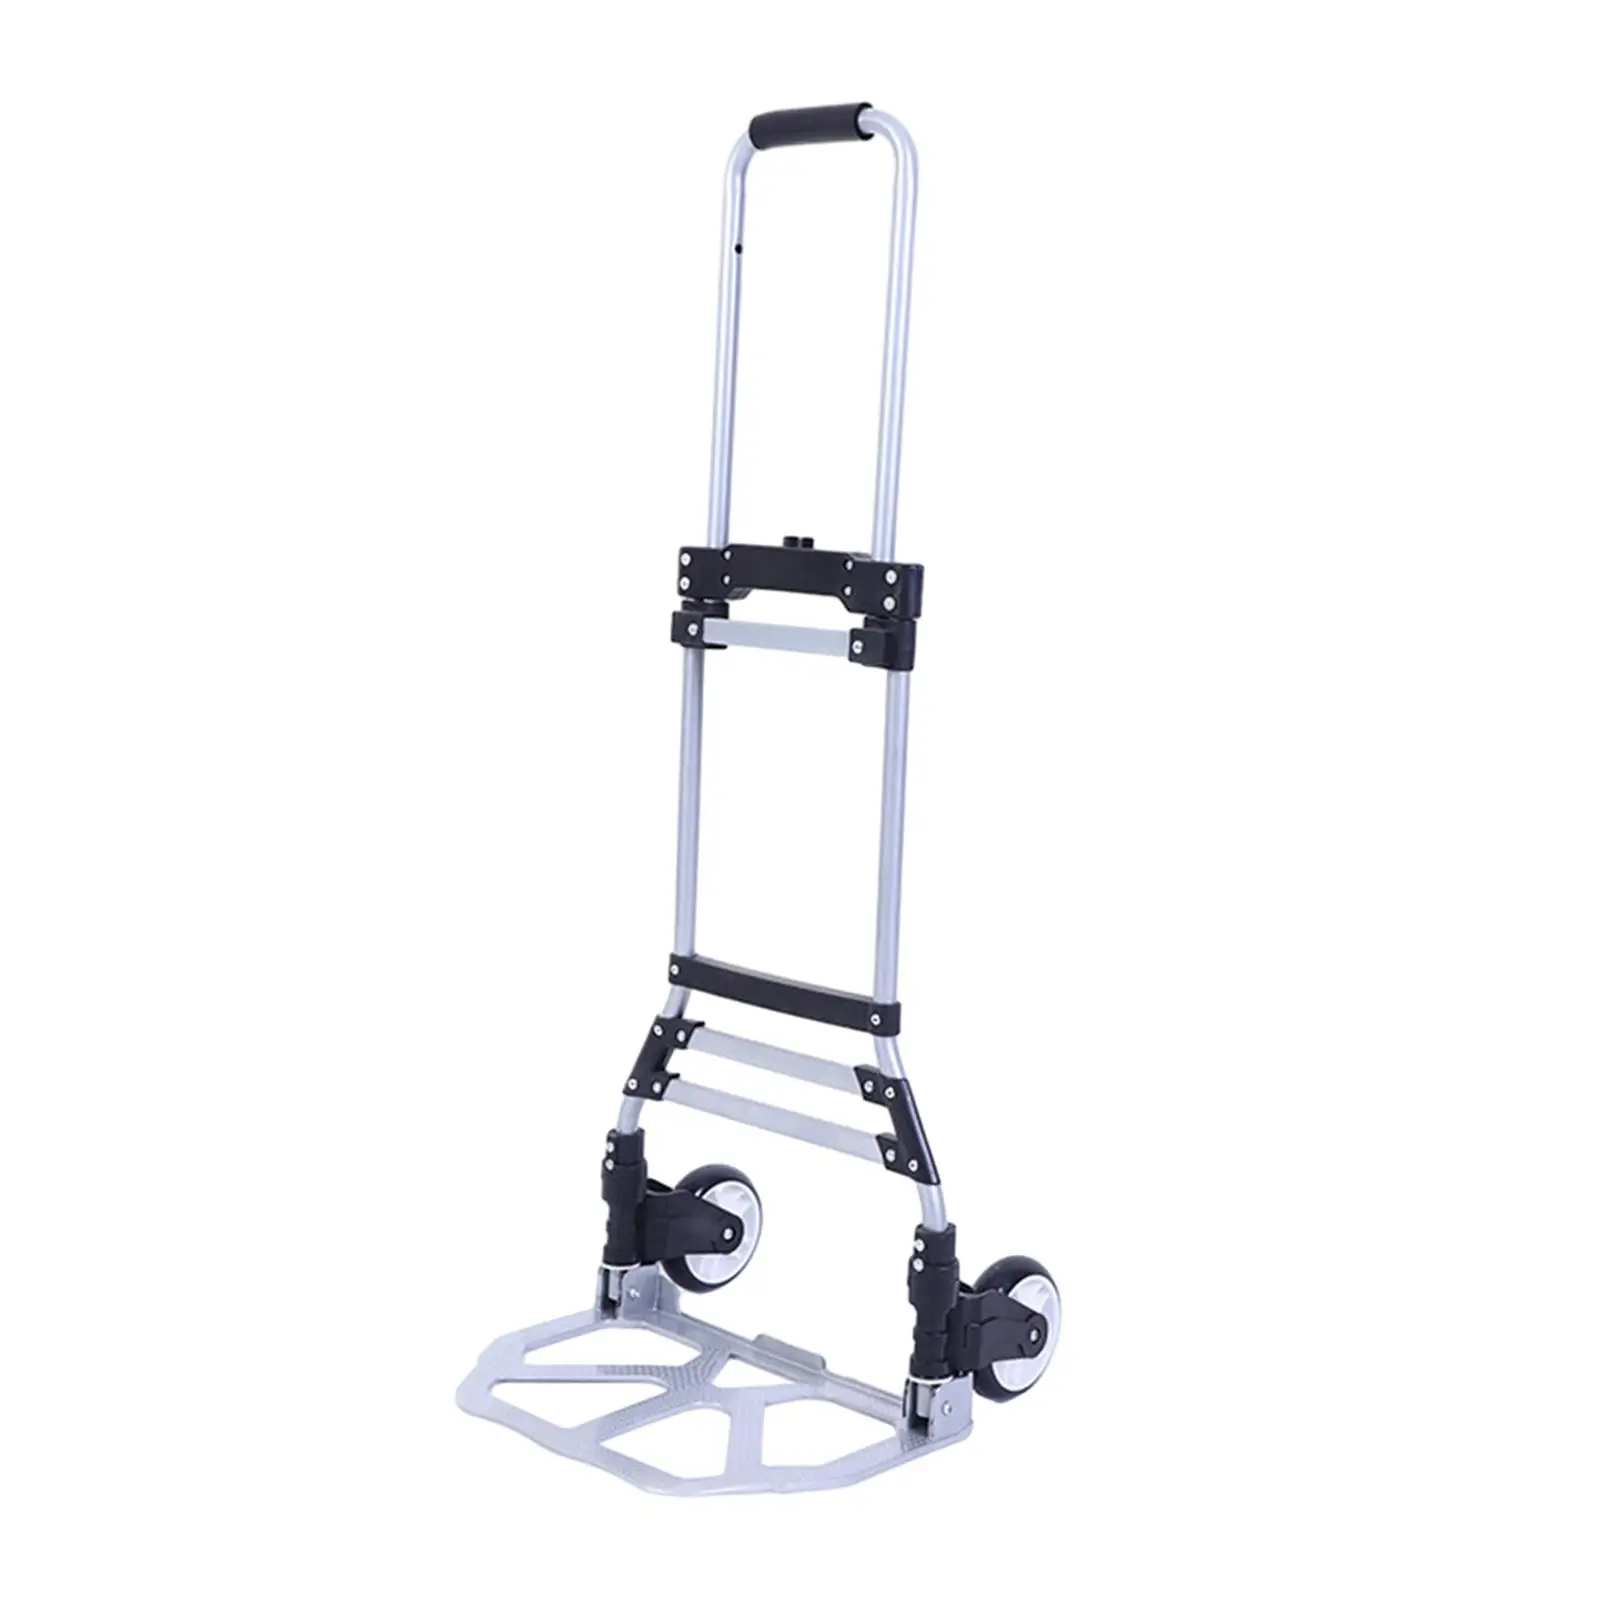 Foldable Roller Shopping Trolley Utility Cart Foldable Platform Truck Cart for Shopping Household Office Travel Moving